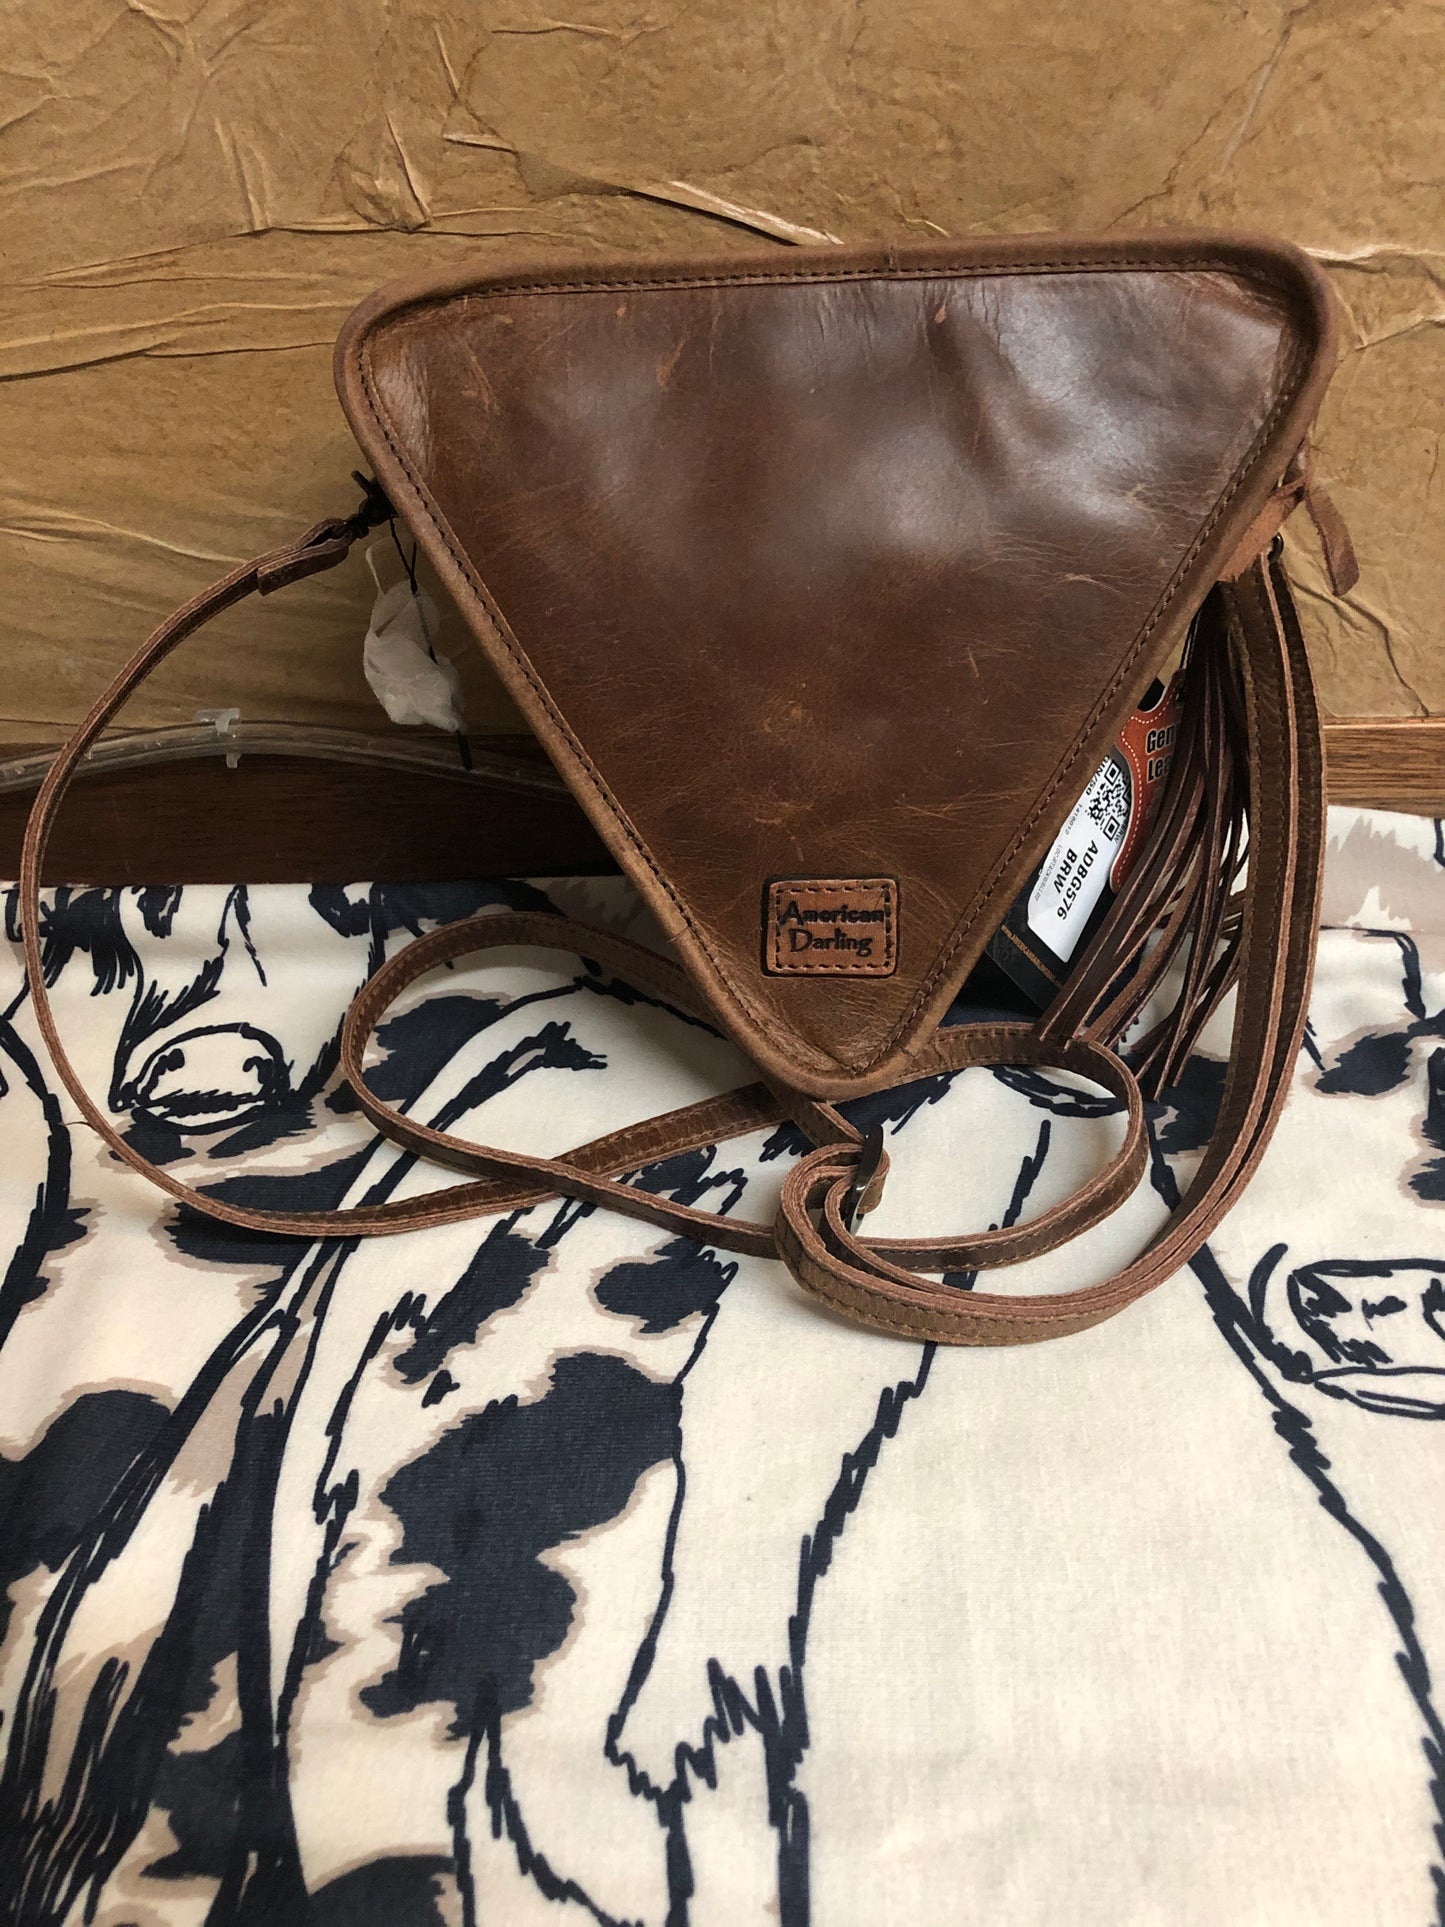 American Darling Tooled Purse with Fringe